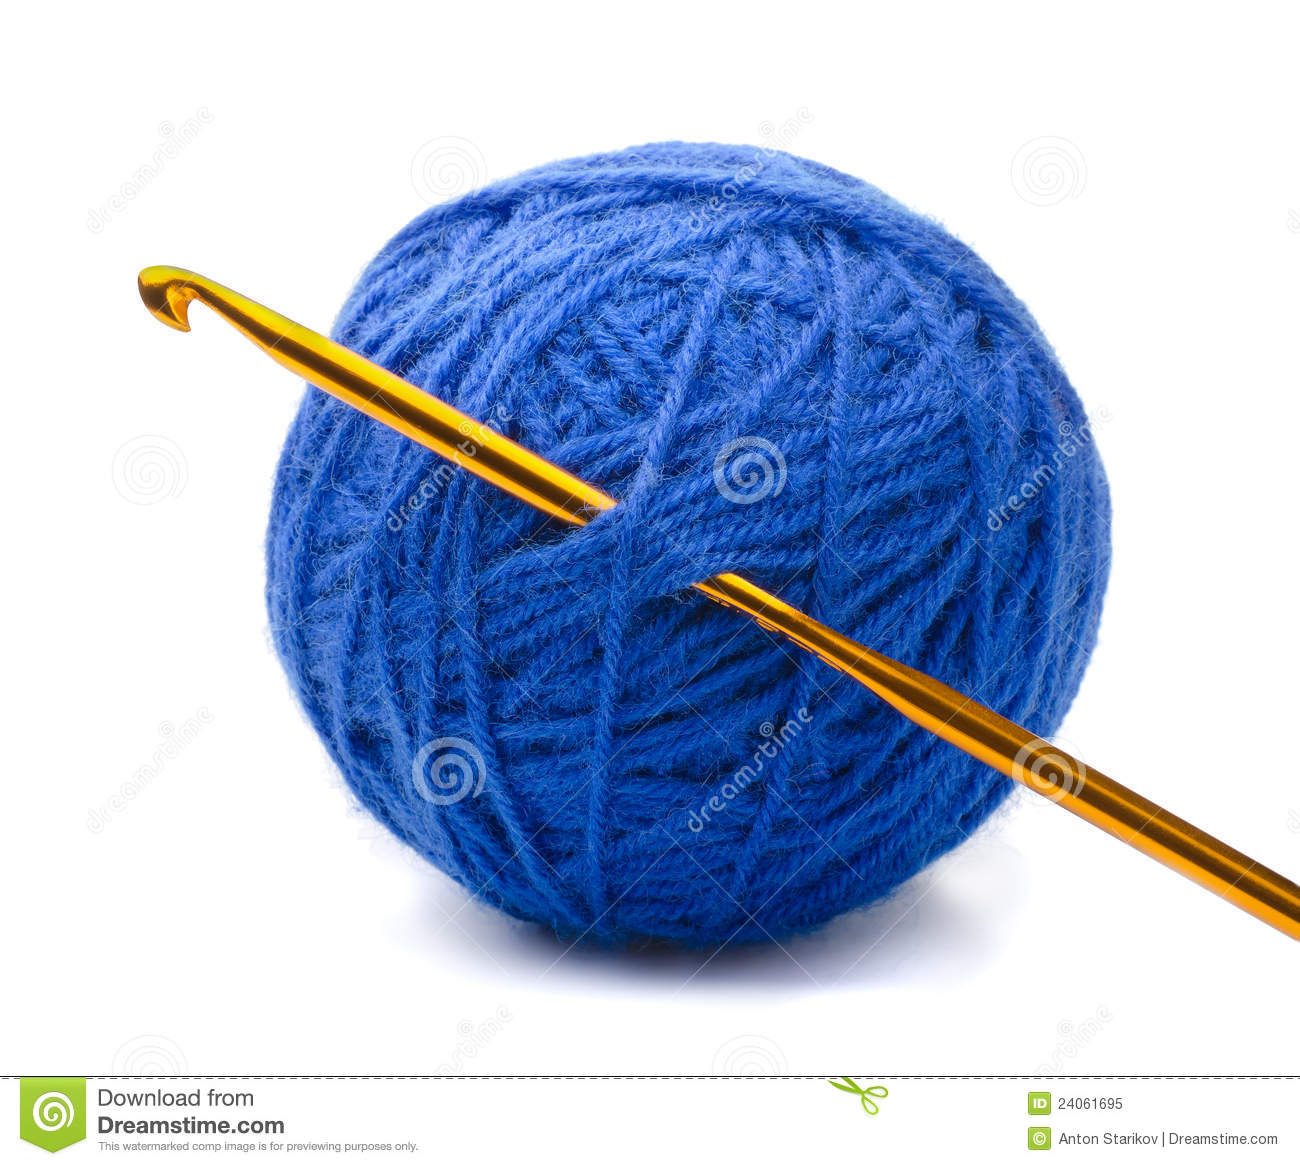 Yarn Crochet Hook Stock Photos, Images, & Pictures.